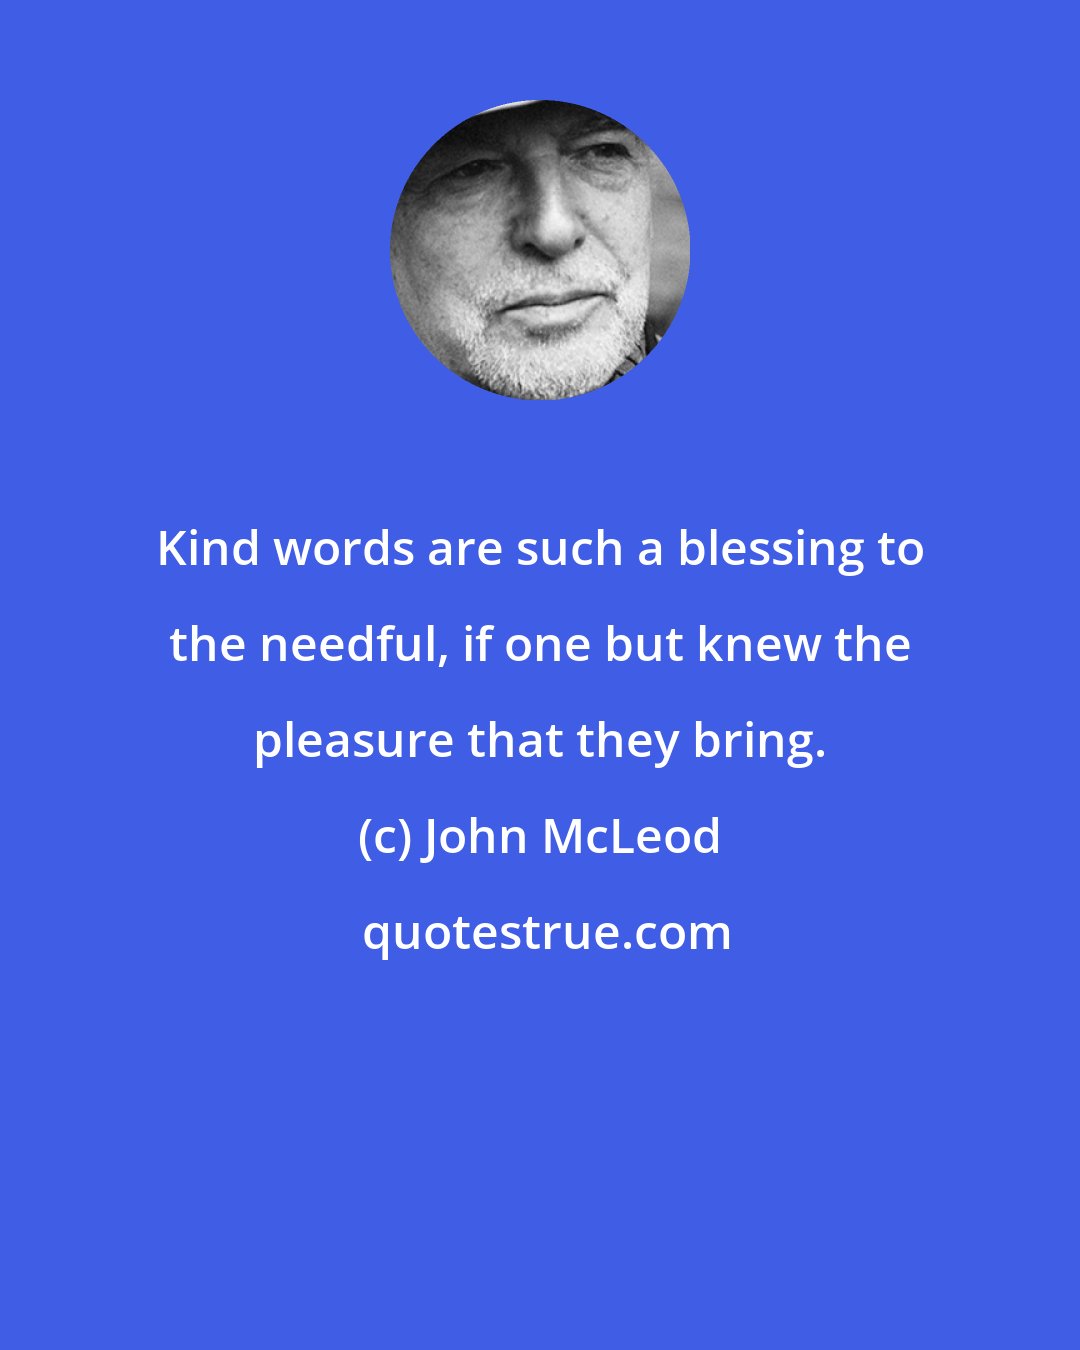 John McLeod: Kind words are such a blessing to the needful, if one but knew the pleasure that they bring.